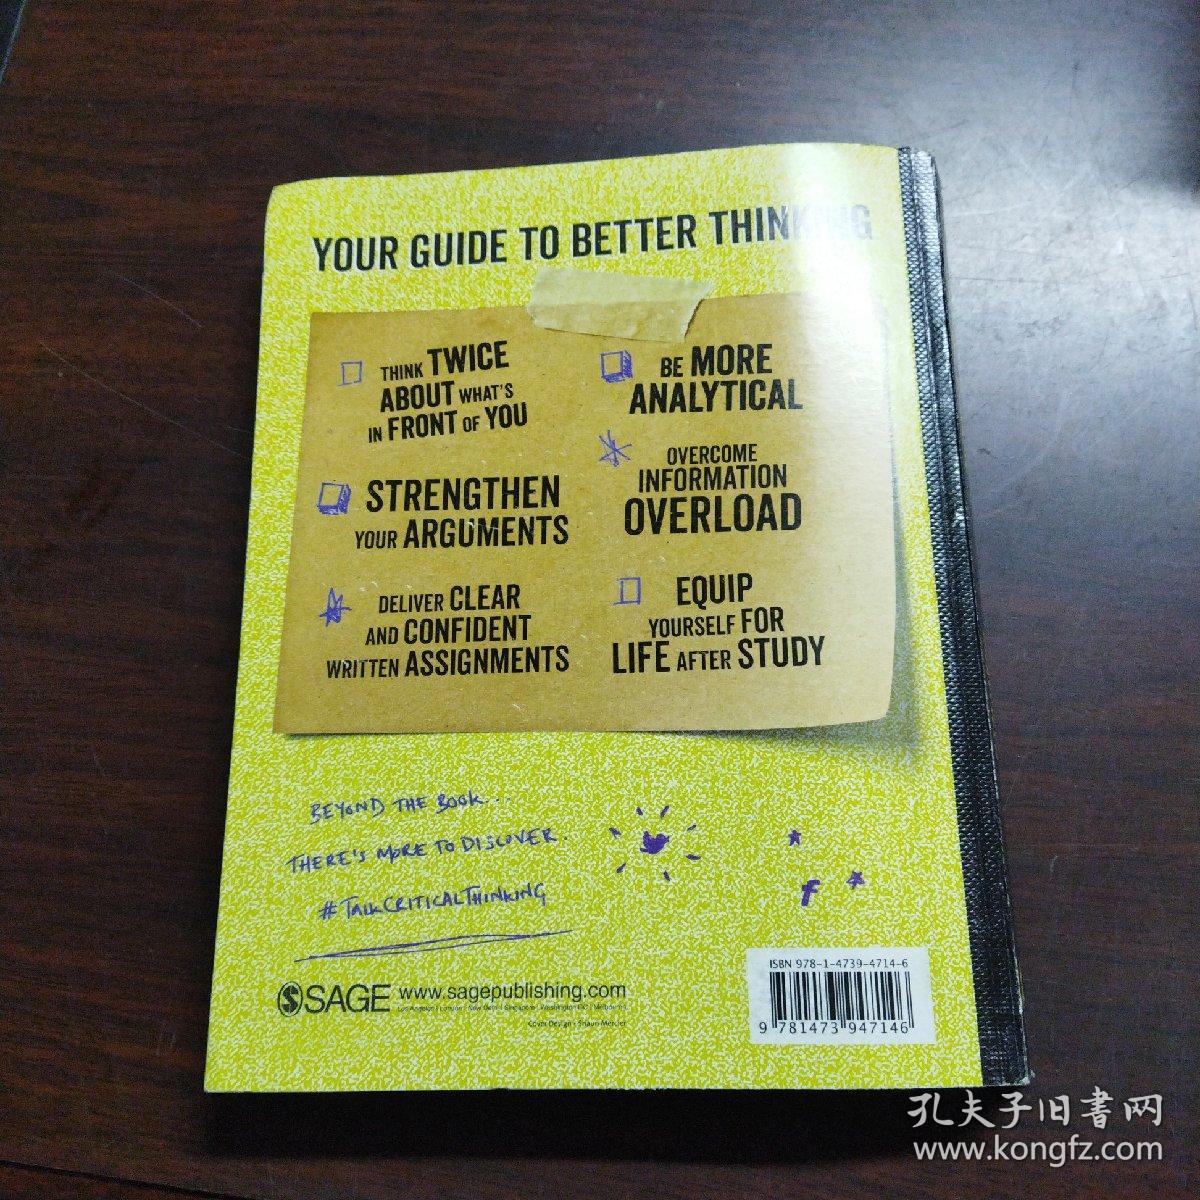 Critical Thinking: Your Guide to Effective Argument, Successful Analysis and Independent Study（英文原版）